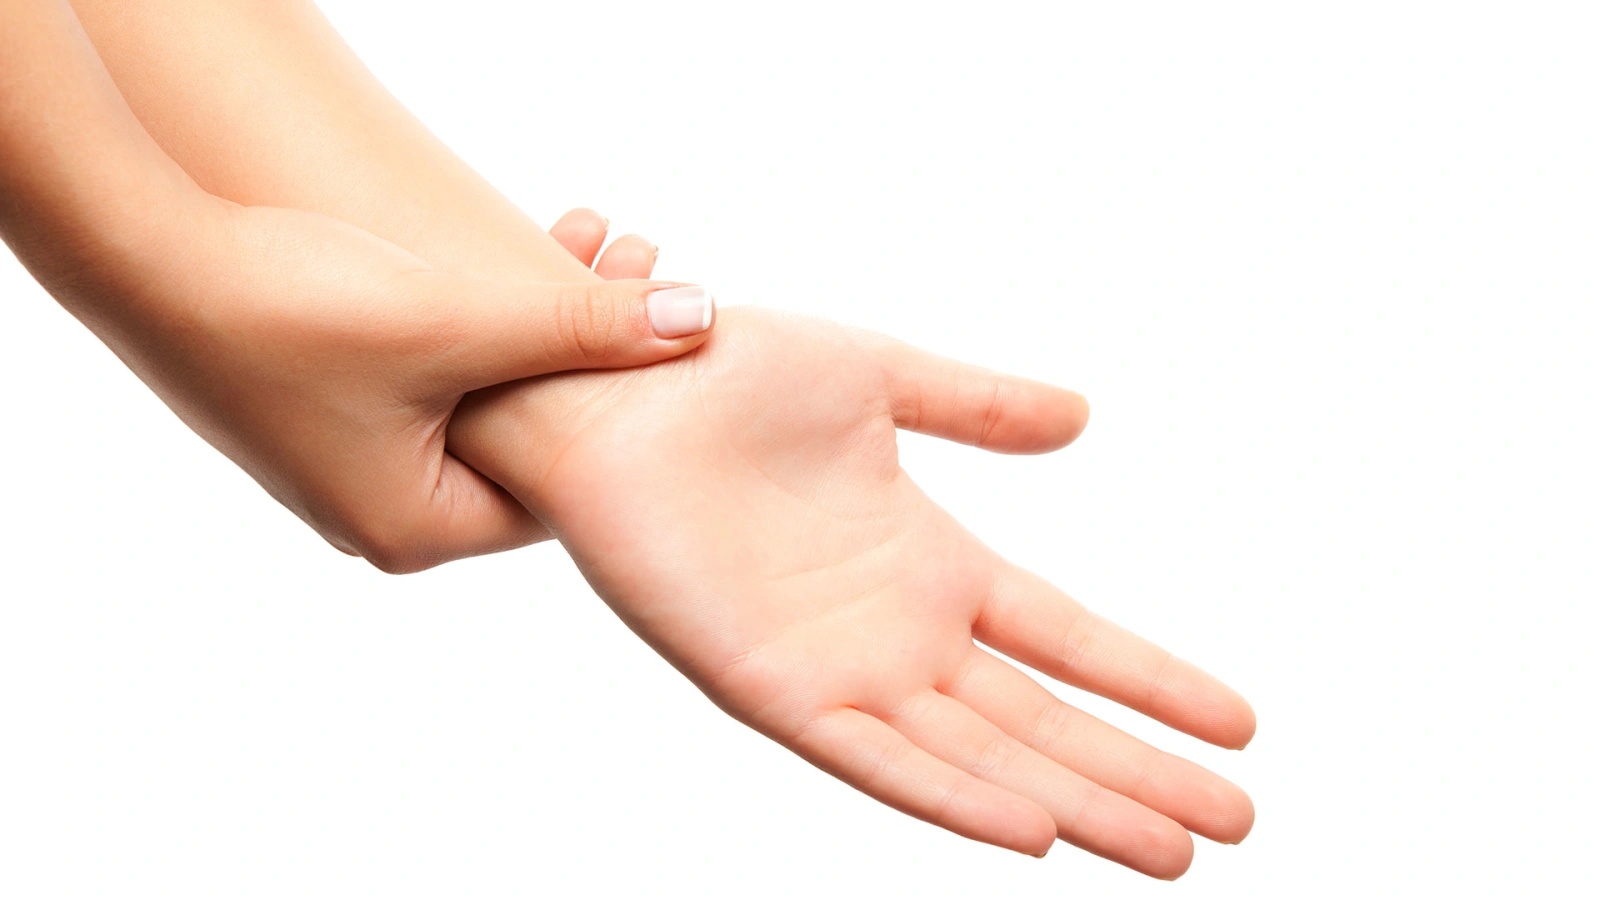 Wrist Relief: 6 Poses for RSI (Repetitive Stress Injury)